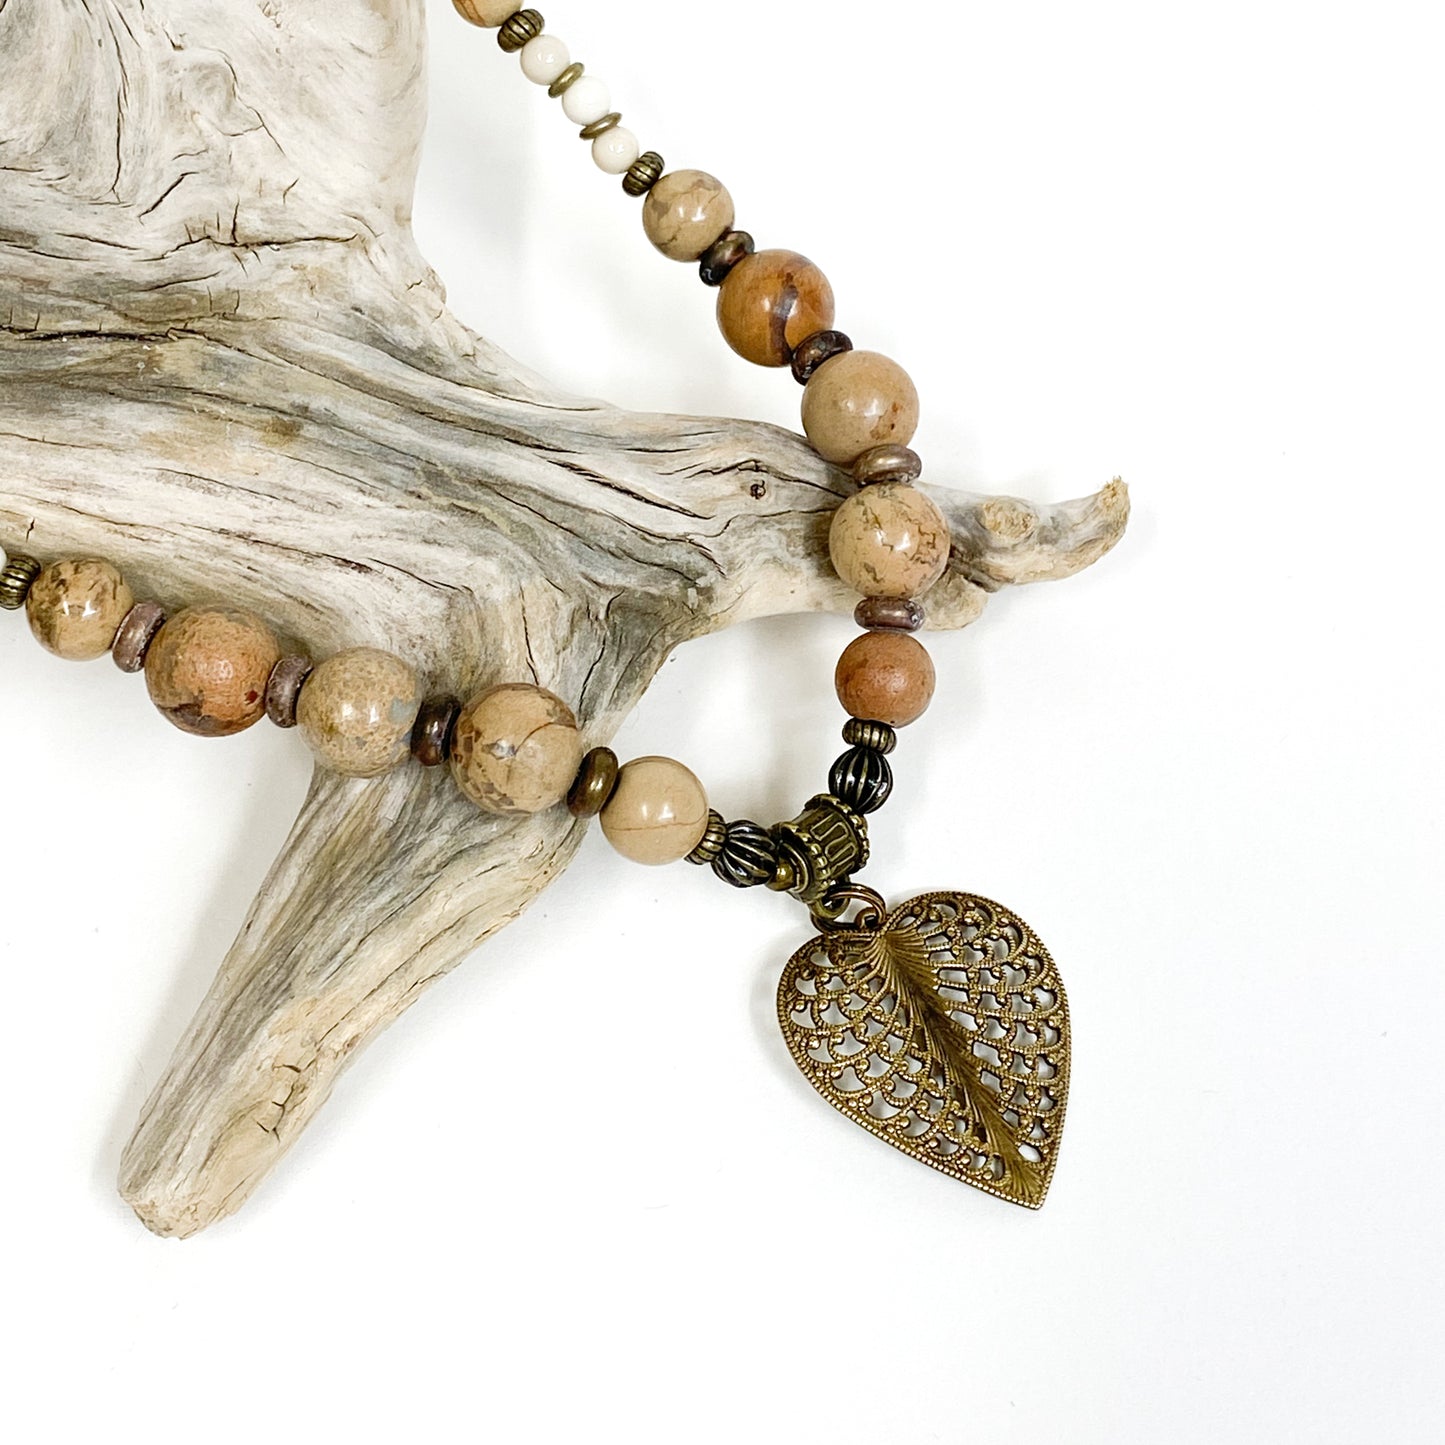 Gemstone of the Earth collection of necklaces by Janice A. Copperstone of Milford, Mich., featuring a bronze or verdigris pendant w/ Jasper (Rugose Corals) beads, a dense, opaque quartz found in Lake Michigan and Lake Superior